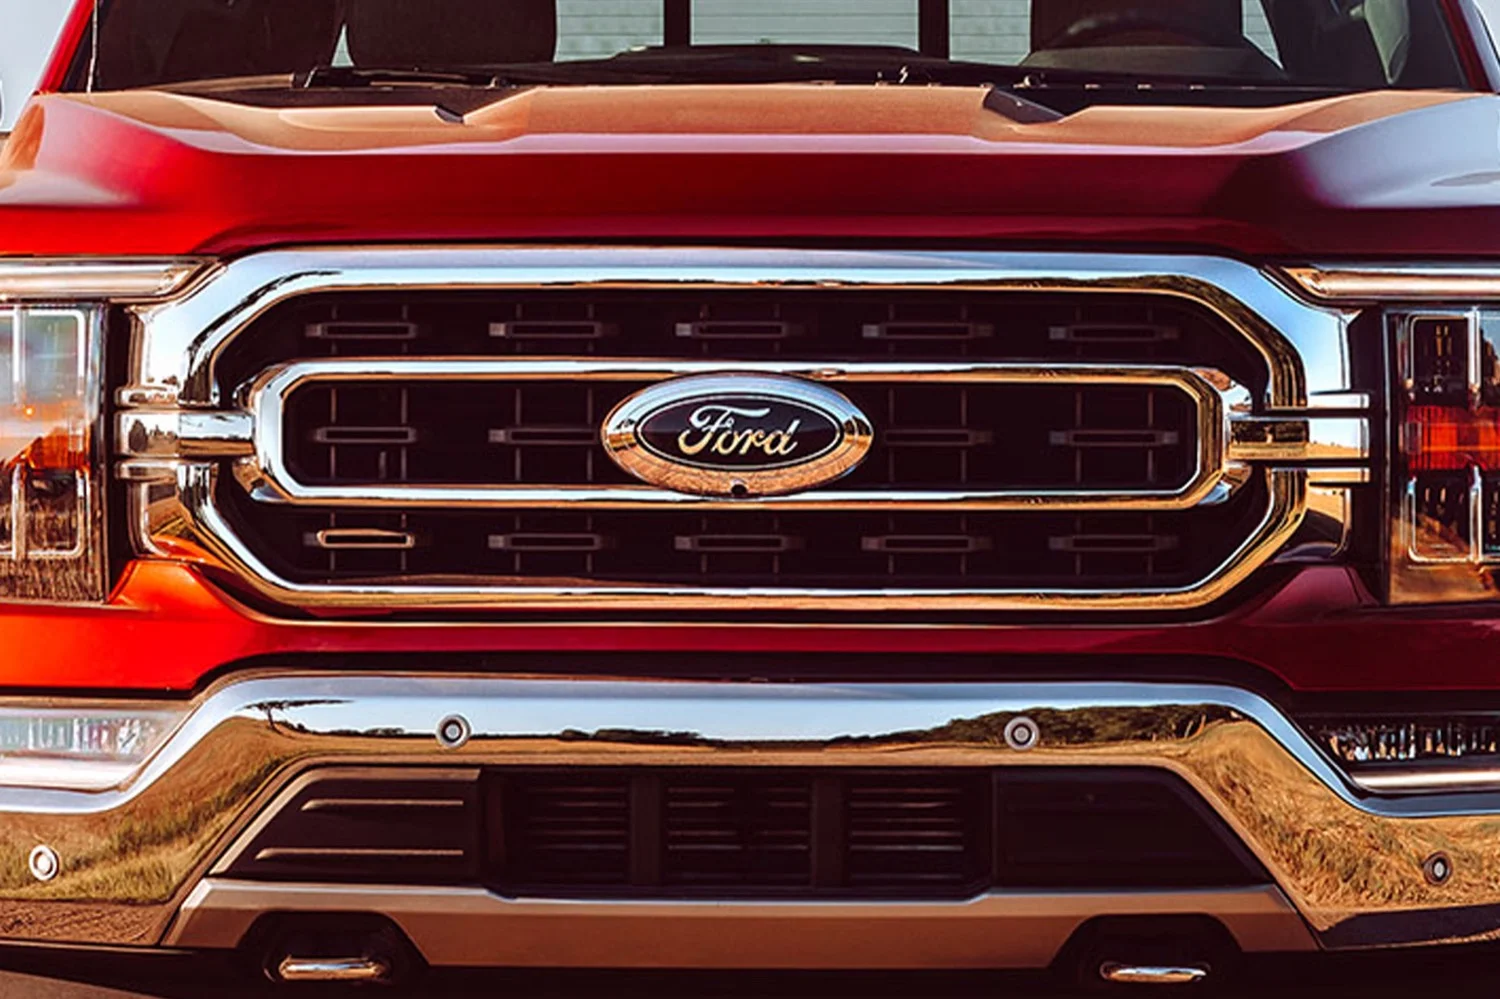 Ford Stock Down Six Percent During Week Of June 27th - July 1st, 2022